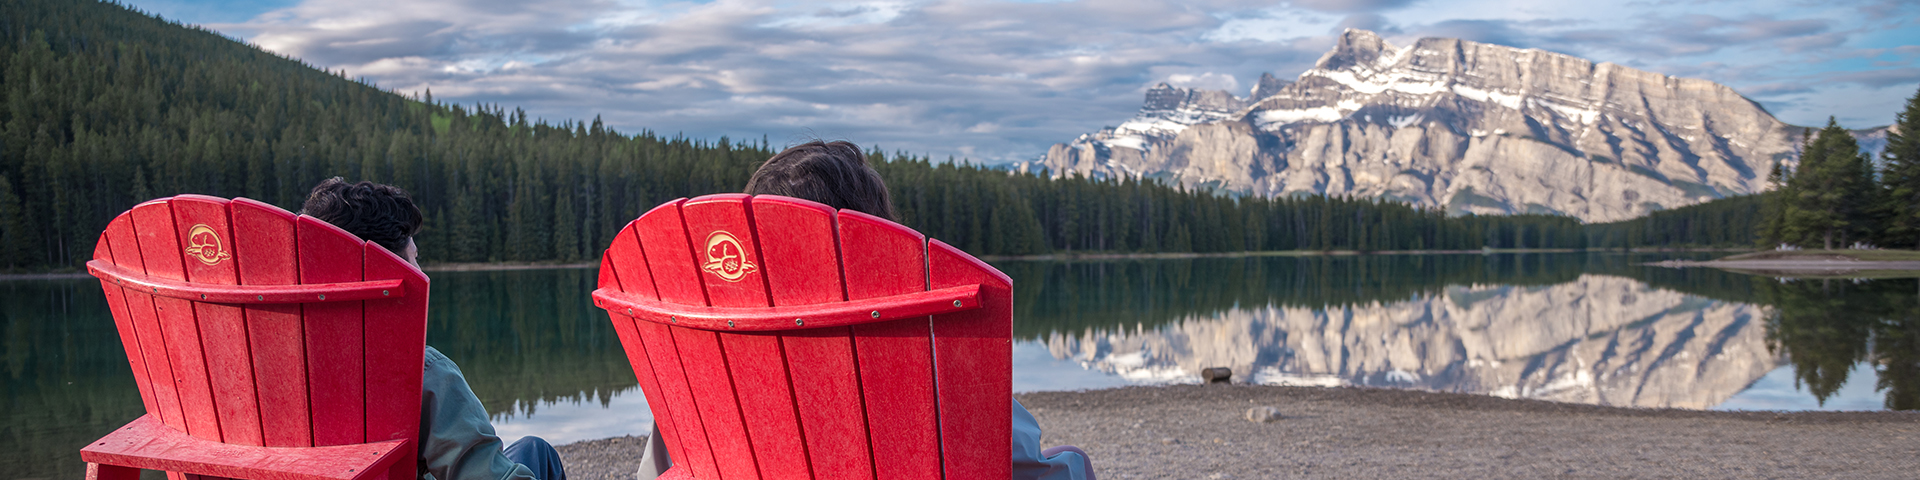 visitors sitting on red chairs in front of lake in banff 